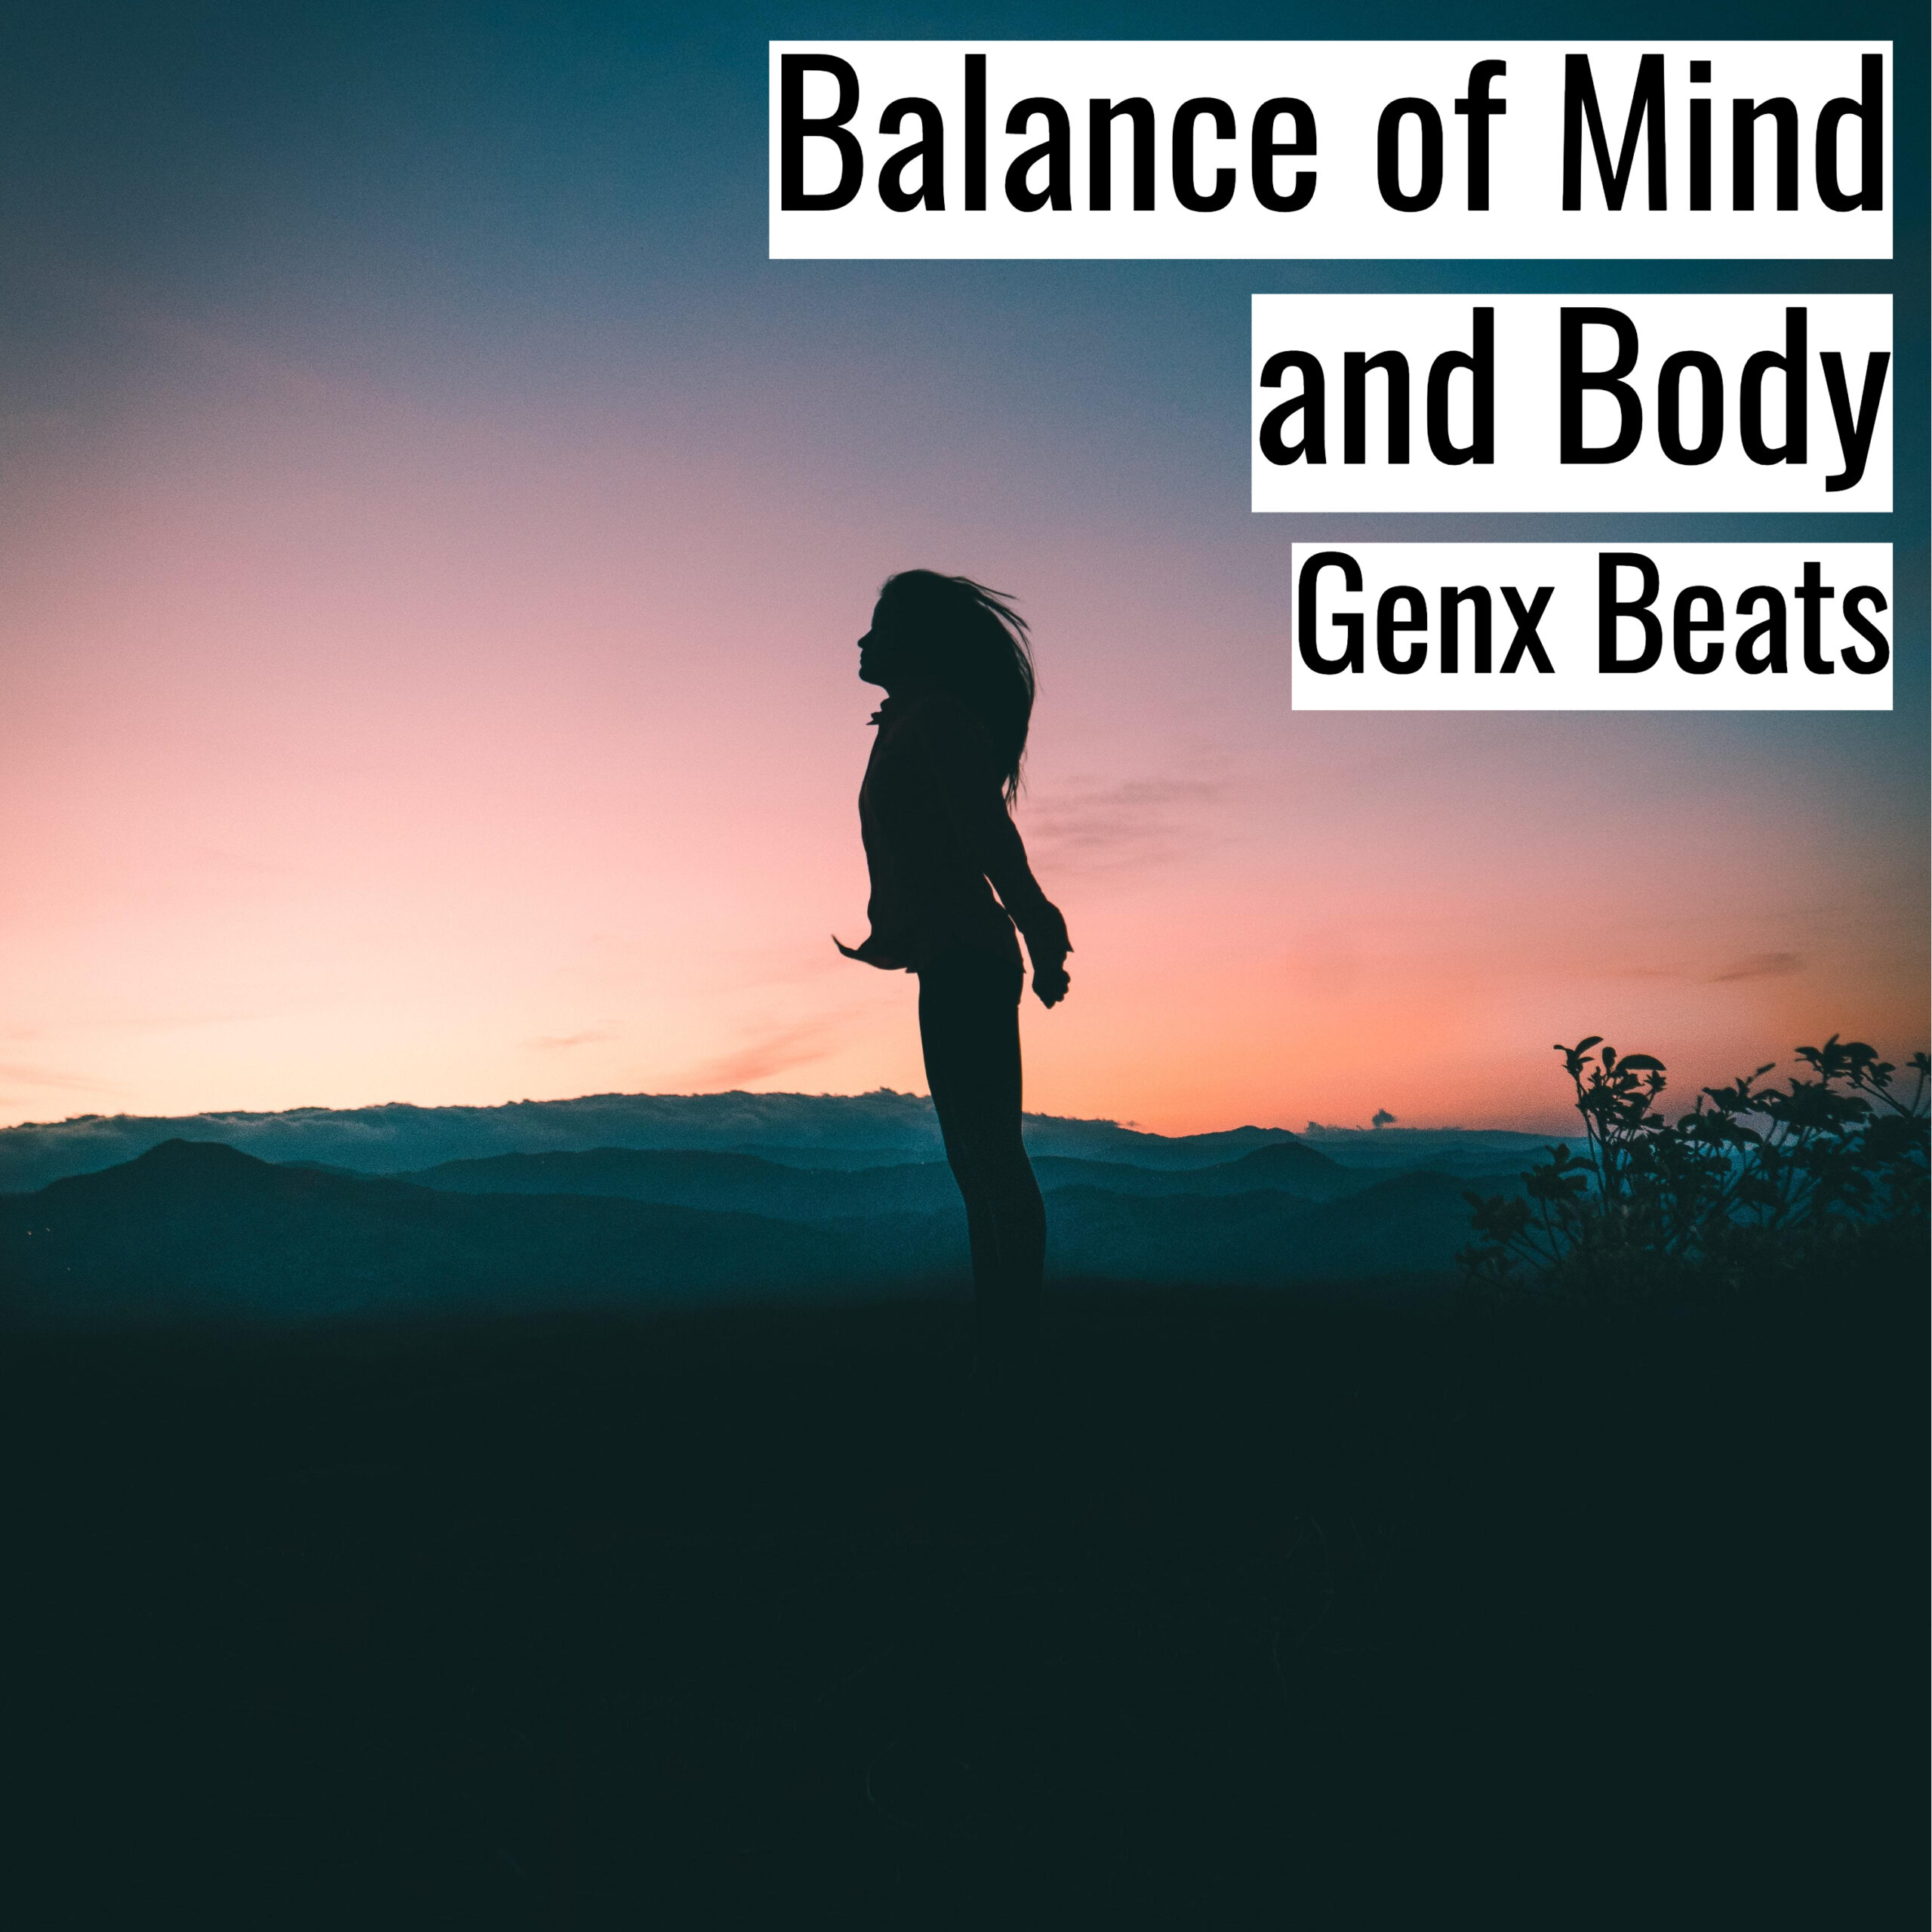 Balance of Mind and Body scaled